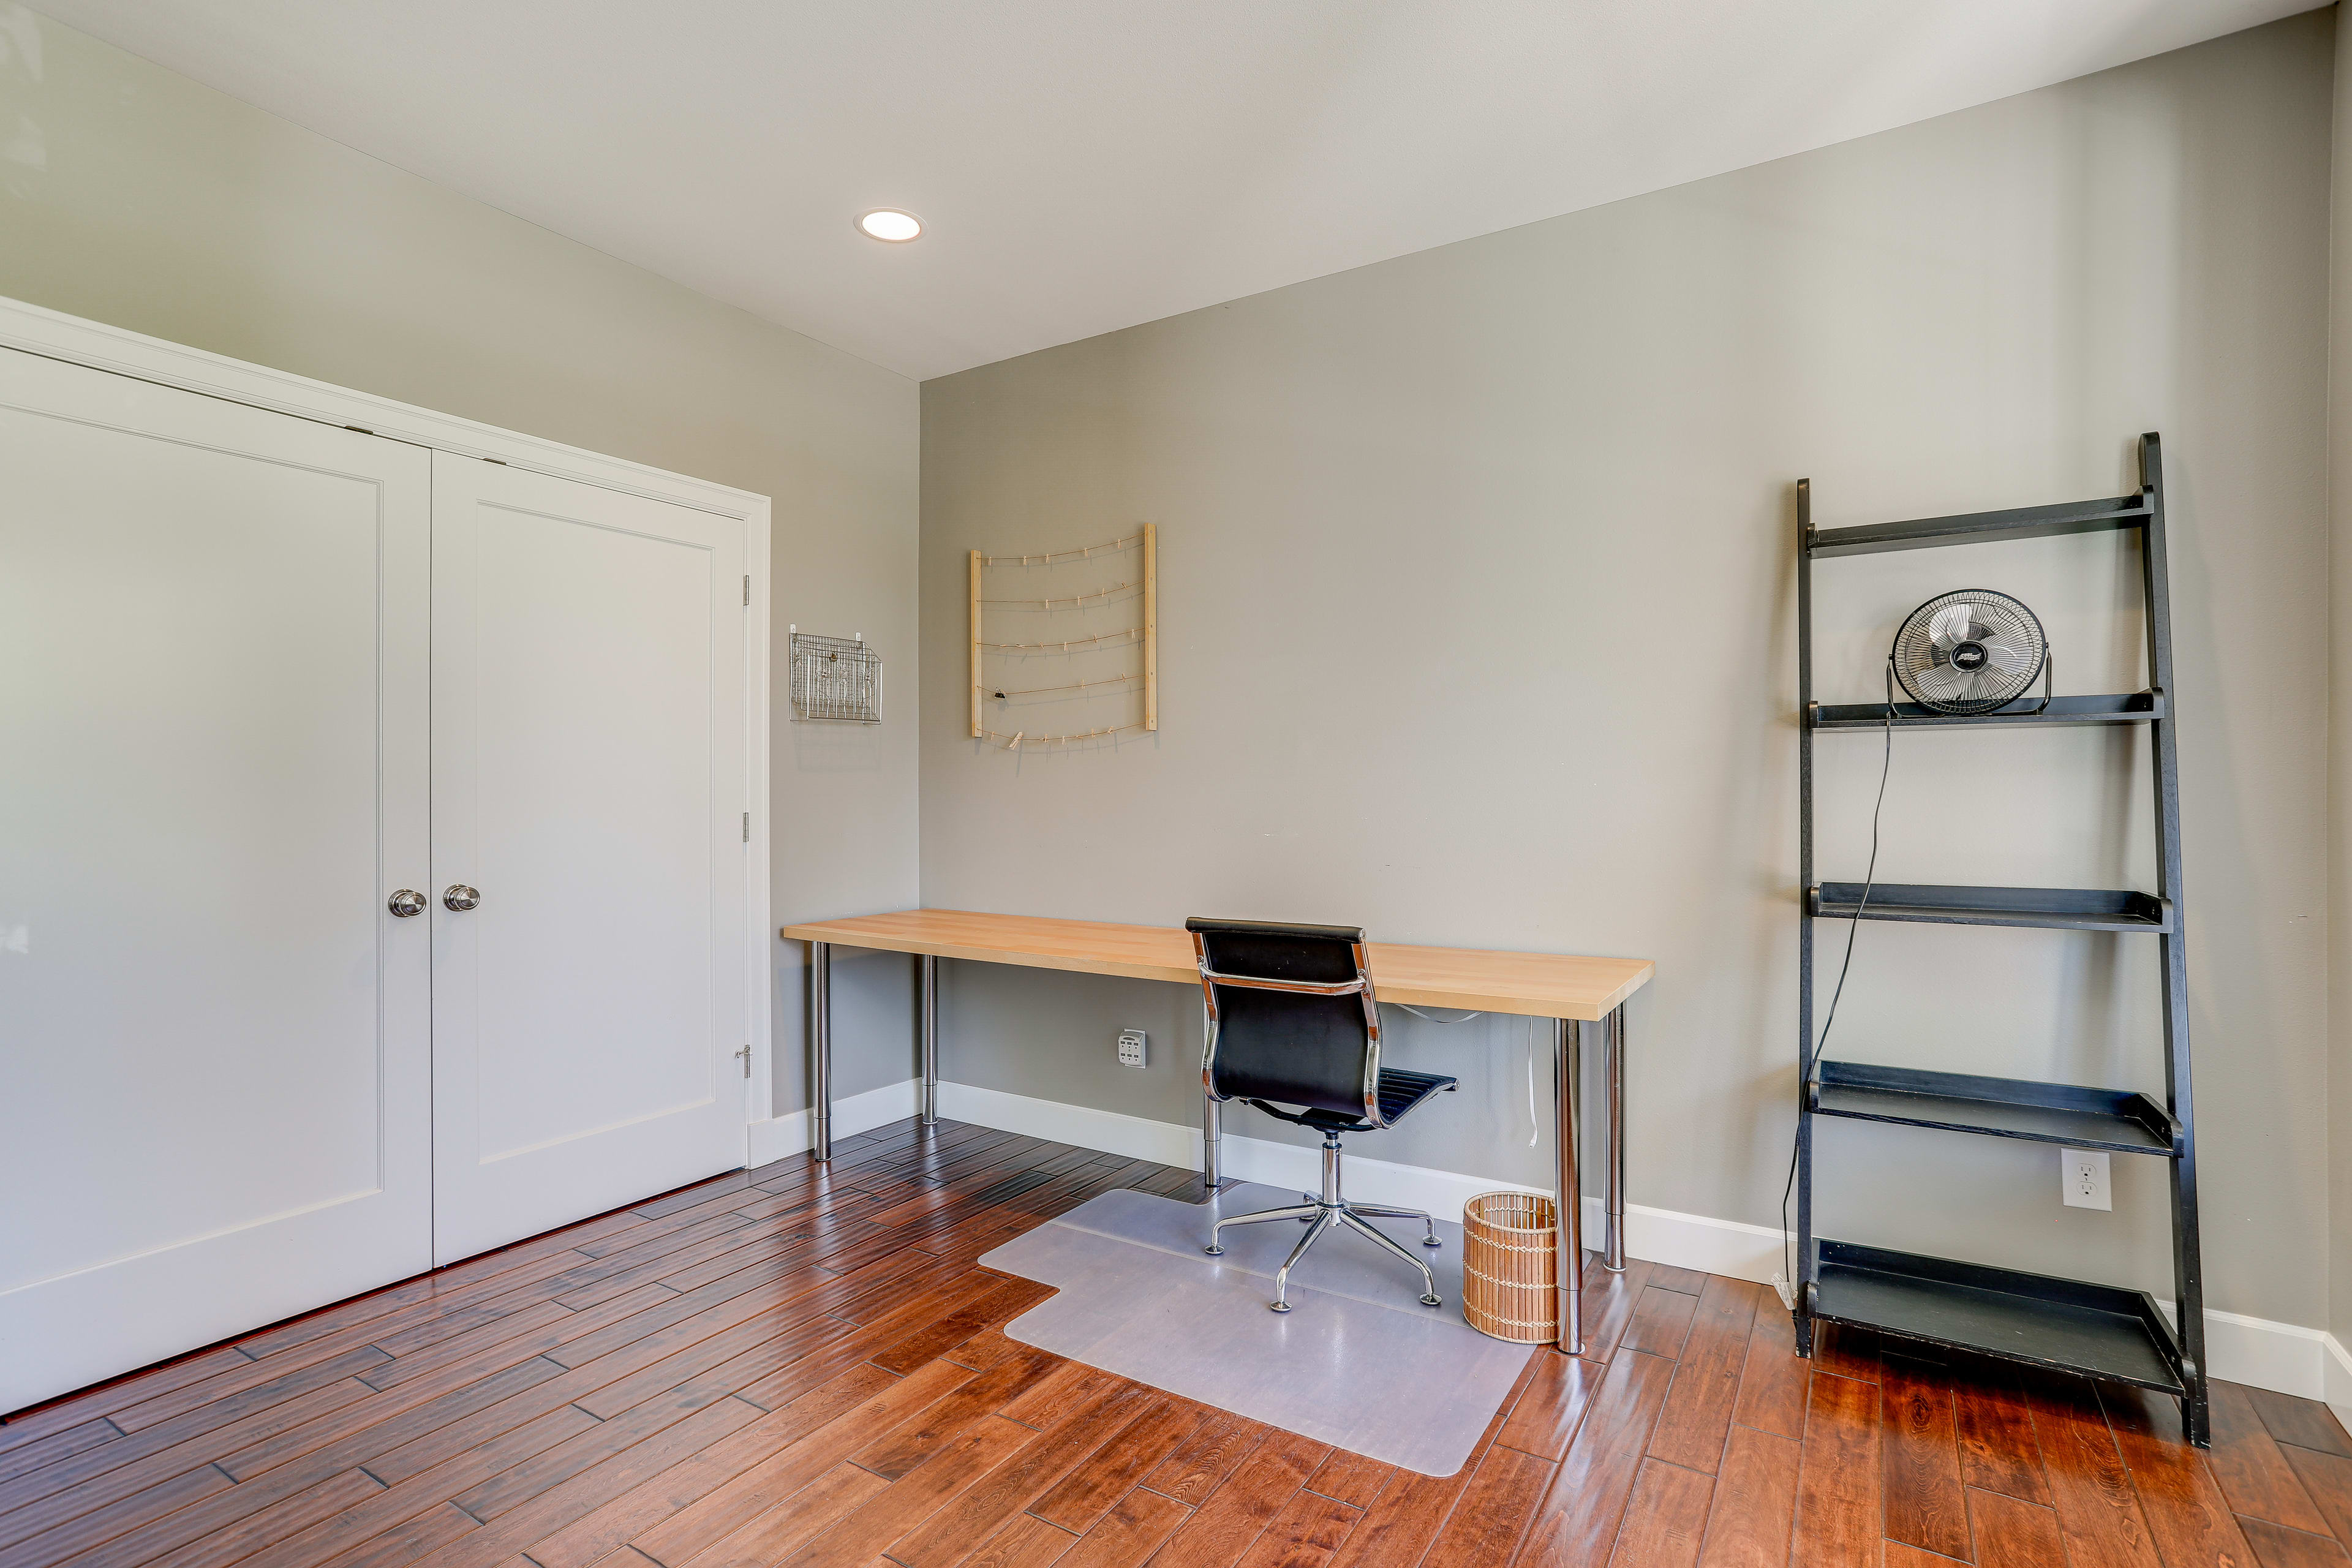 Additional Office Area | Laptop-Friendly Workspace